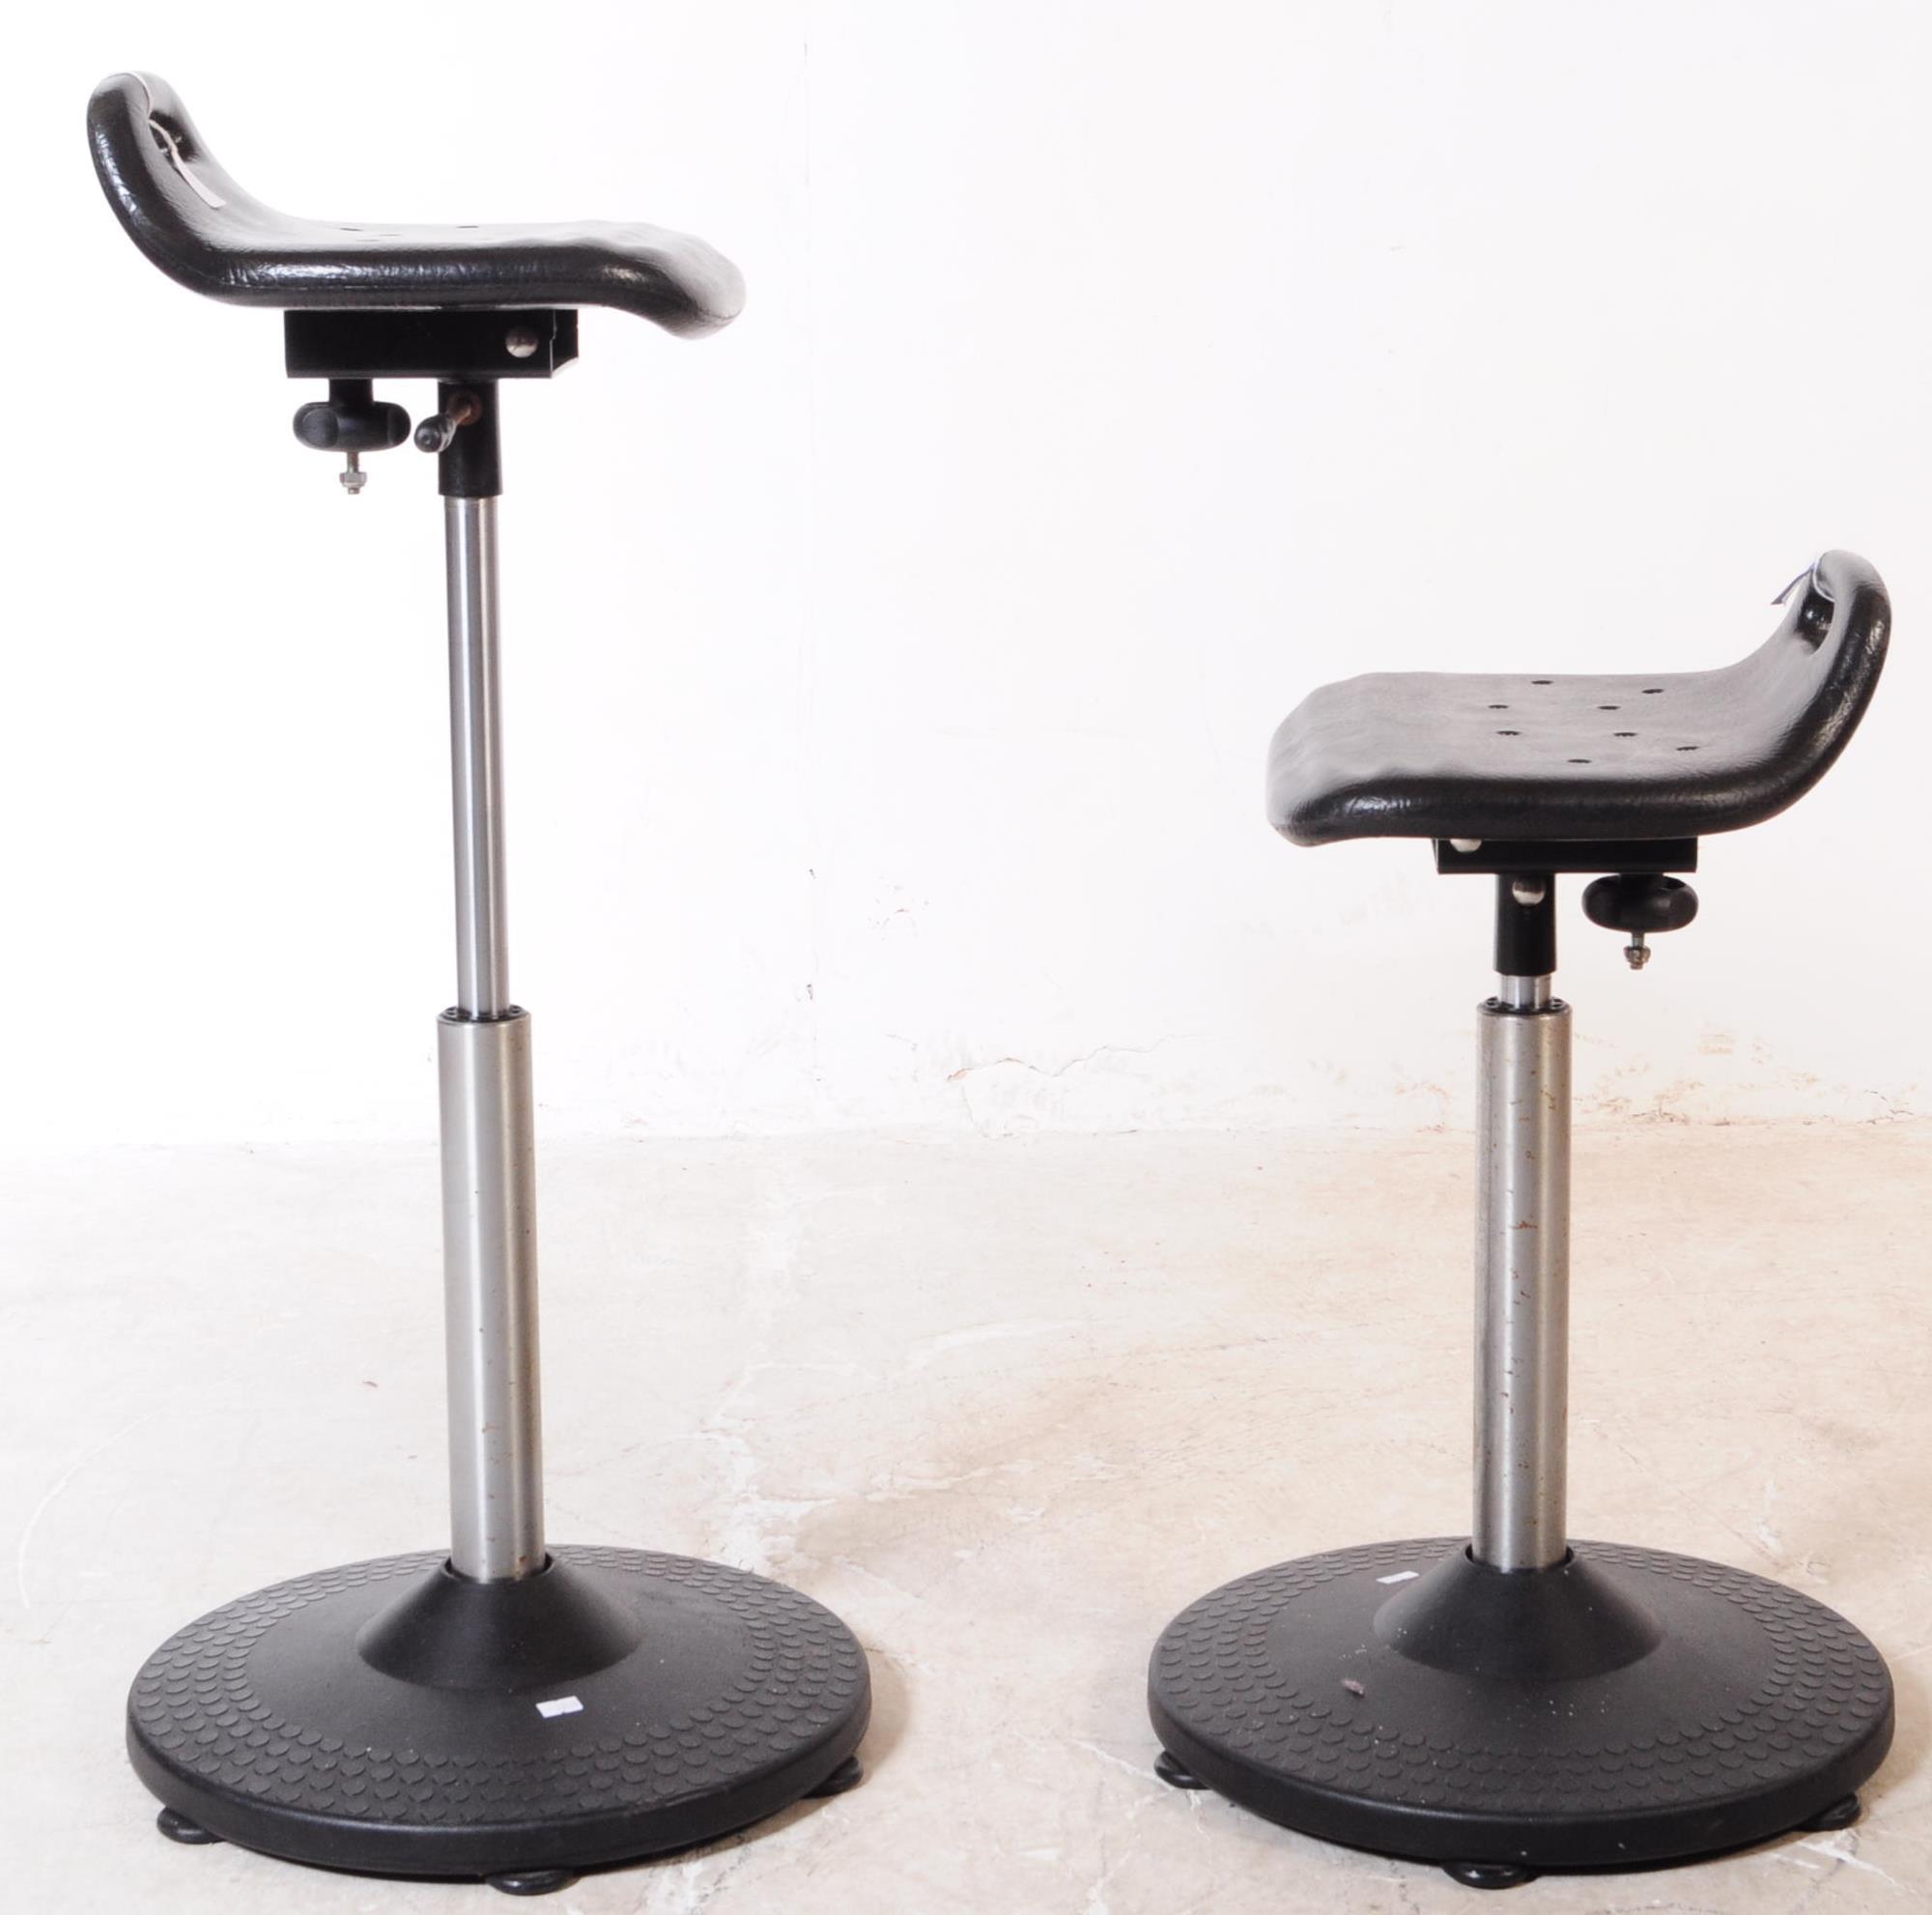 PAIR OF CONTEMPORARY ADJUSTABLE INDUSTRIAL STOOLS - Image 5 of 7